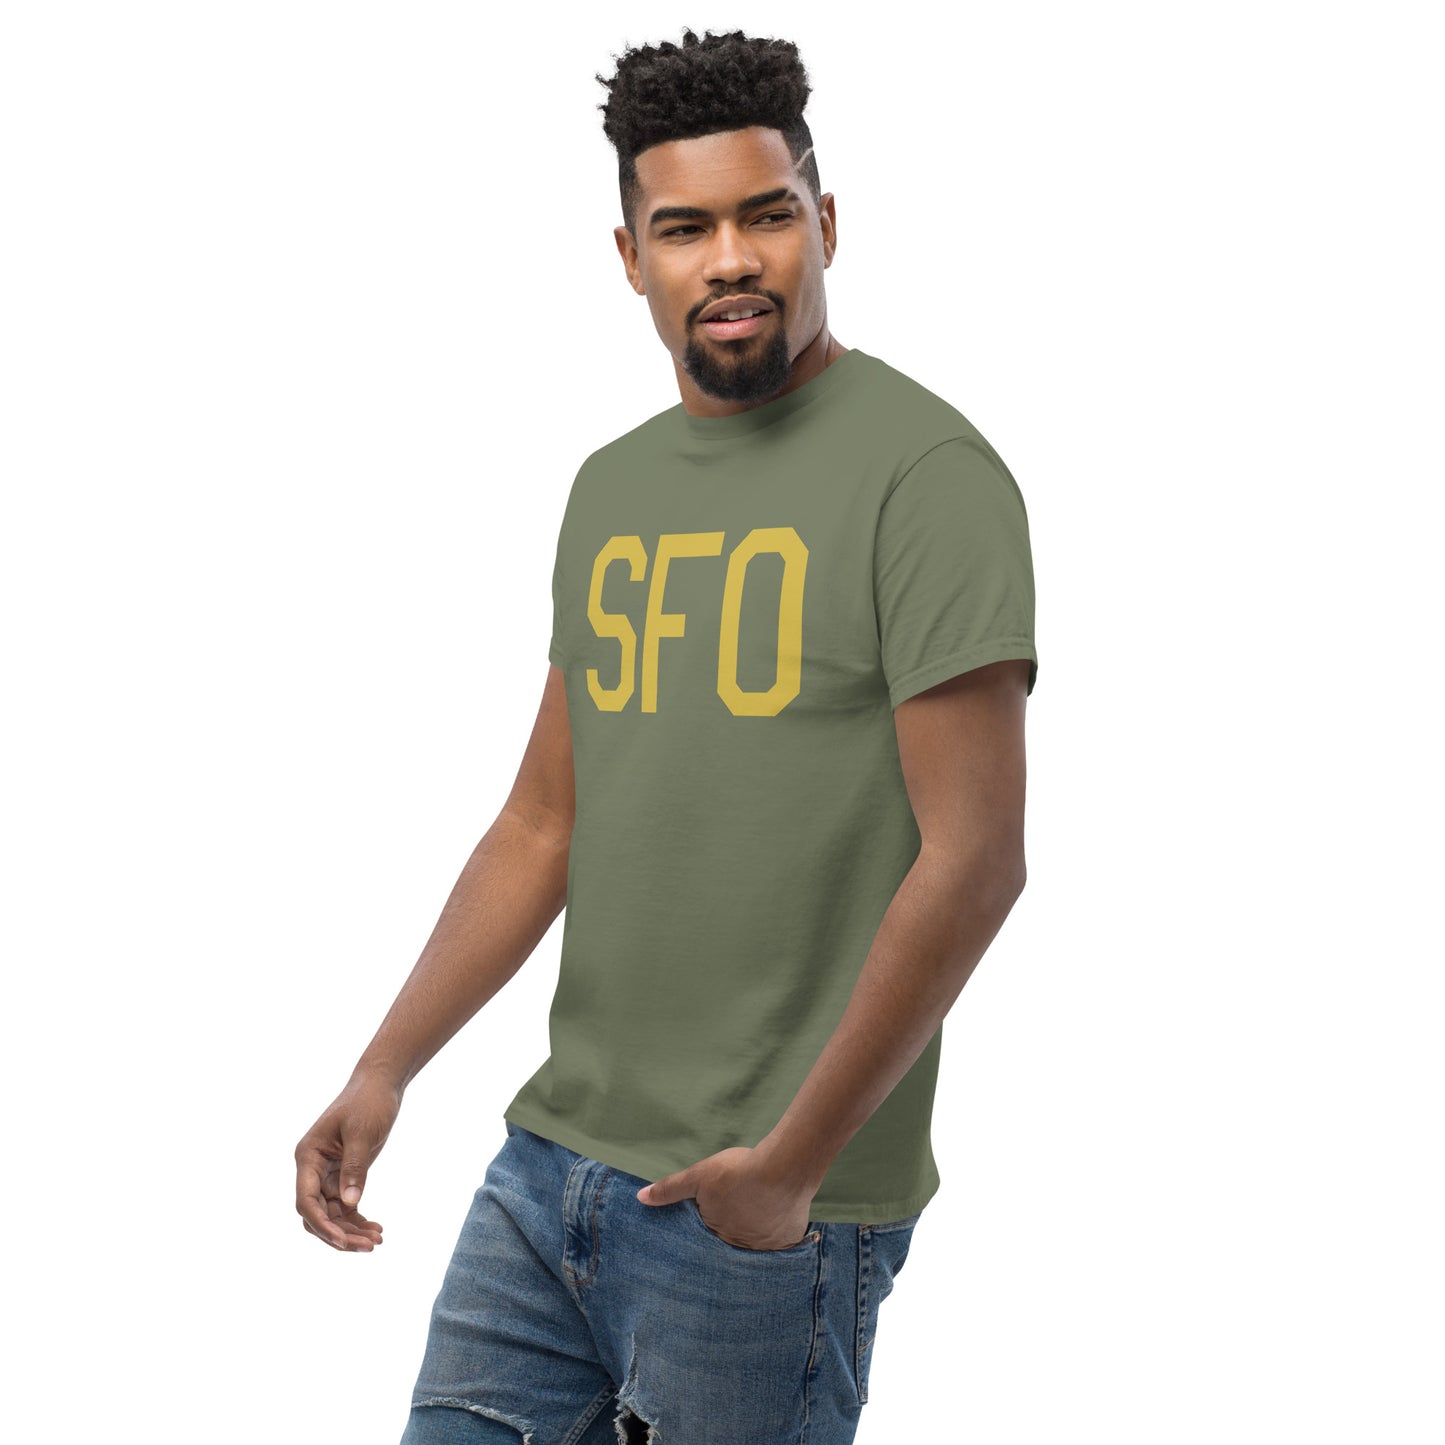 Aviation Enthusiast Men's Tee - Old Gold Graphic • SFO San Francisco • YHM Designs - Image 07